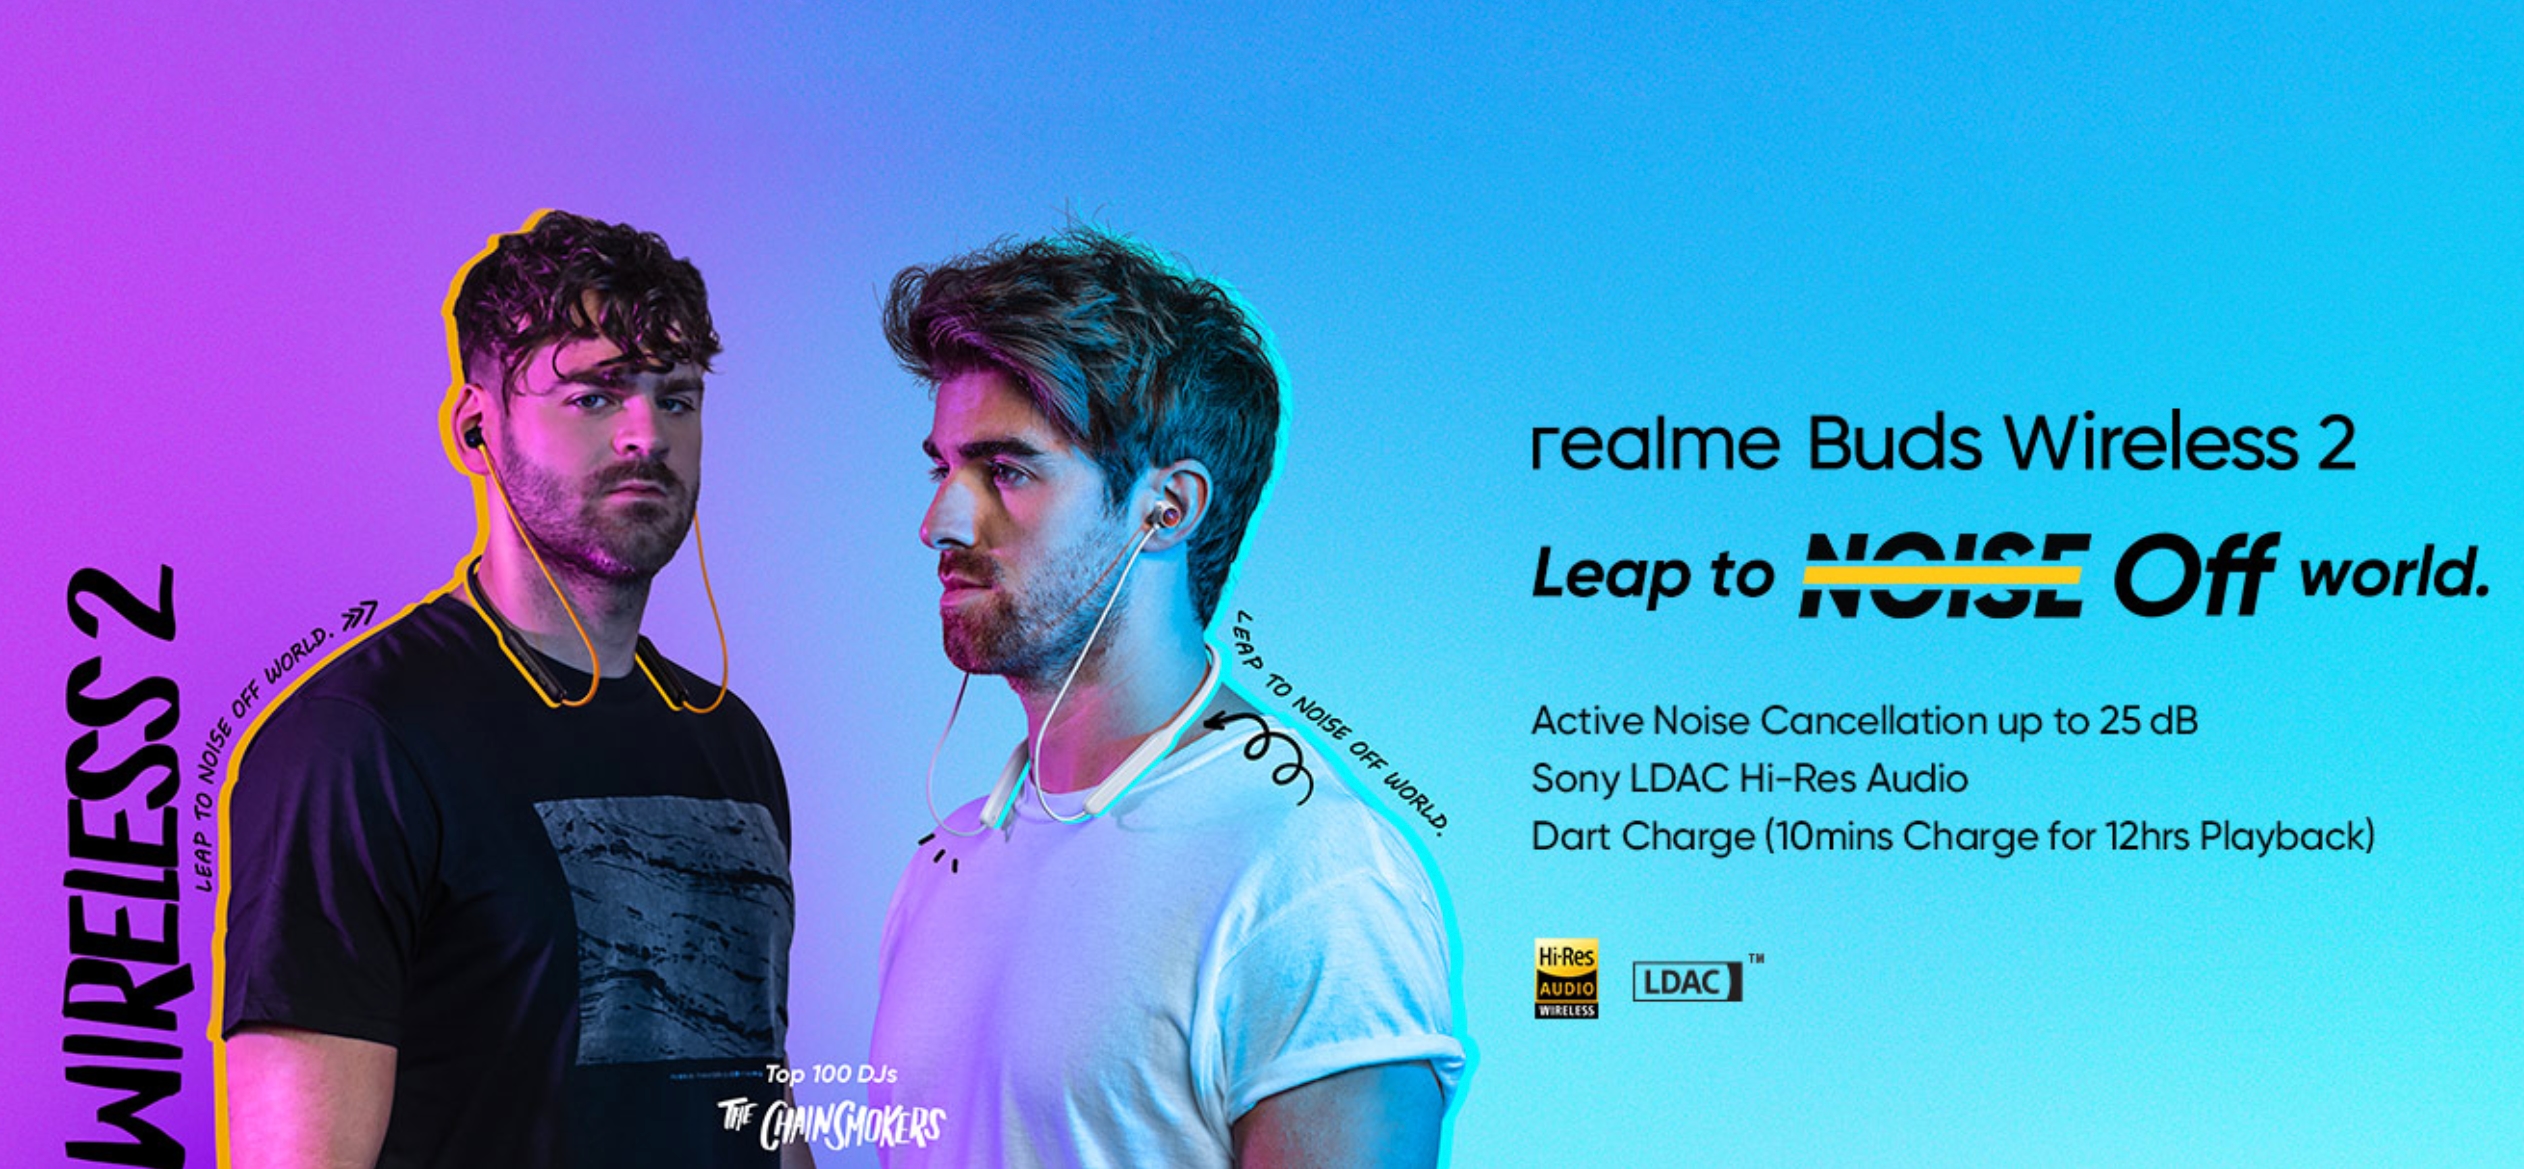 Realme unveils $48 Buds Wireless 2 with Game Mode, ANC, Google Fast Pair and LDAC support